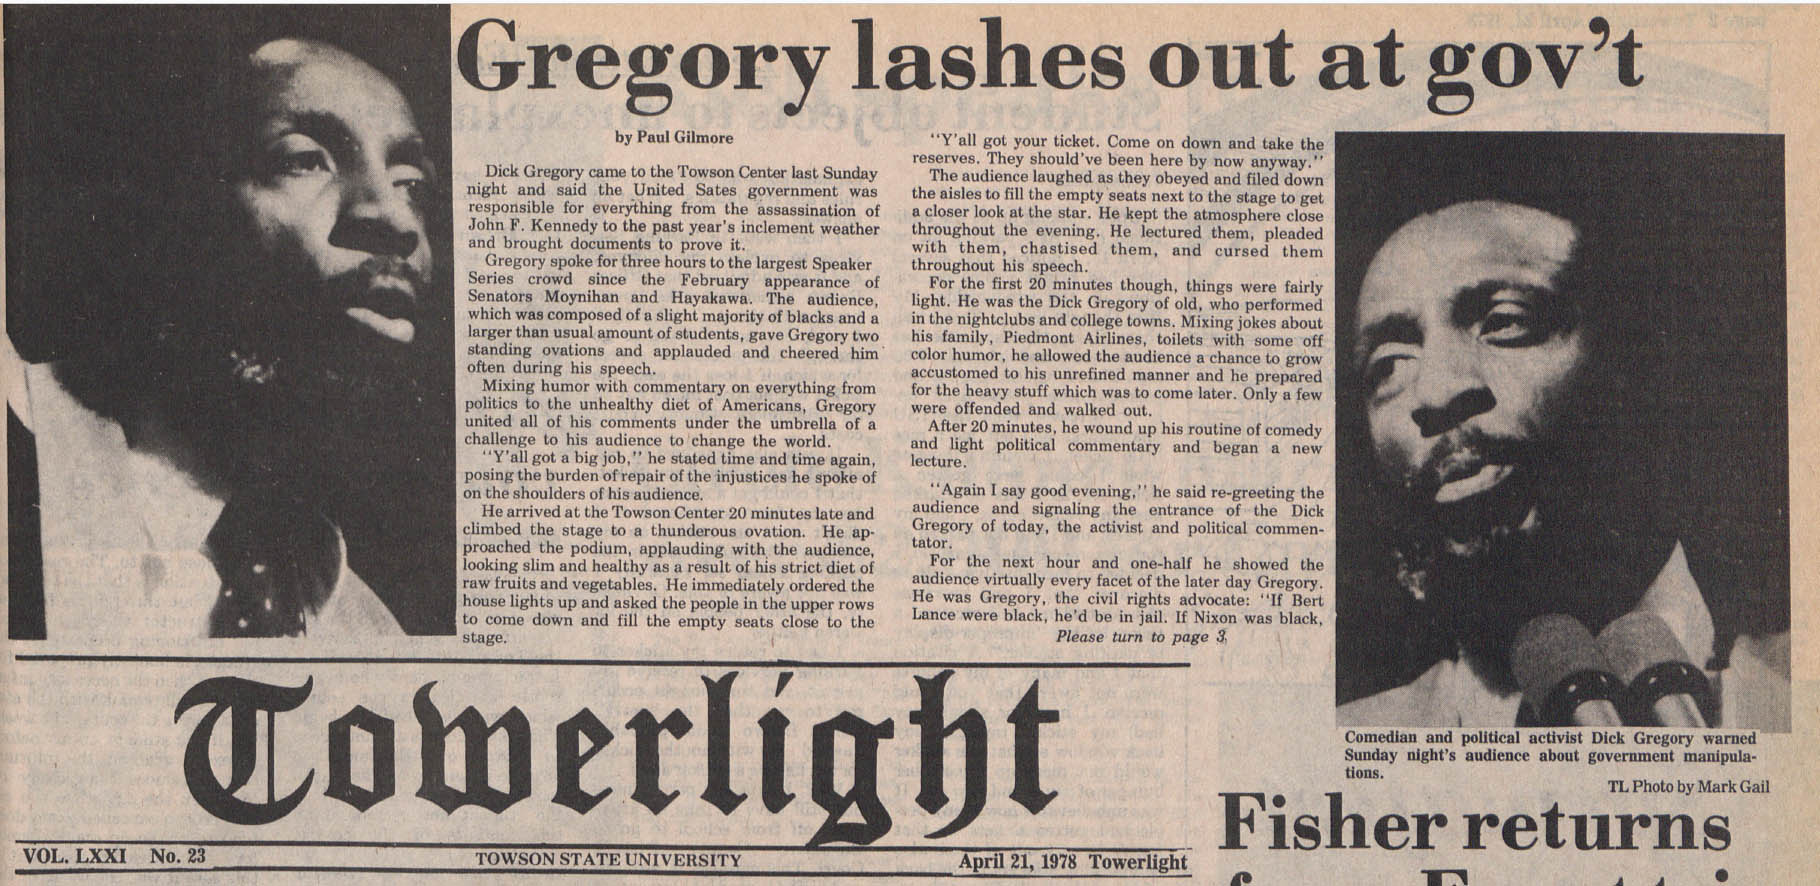 Article showing pictures of Dick Gregory and parts of his speech.